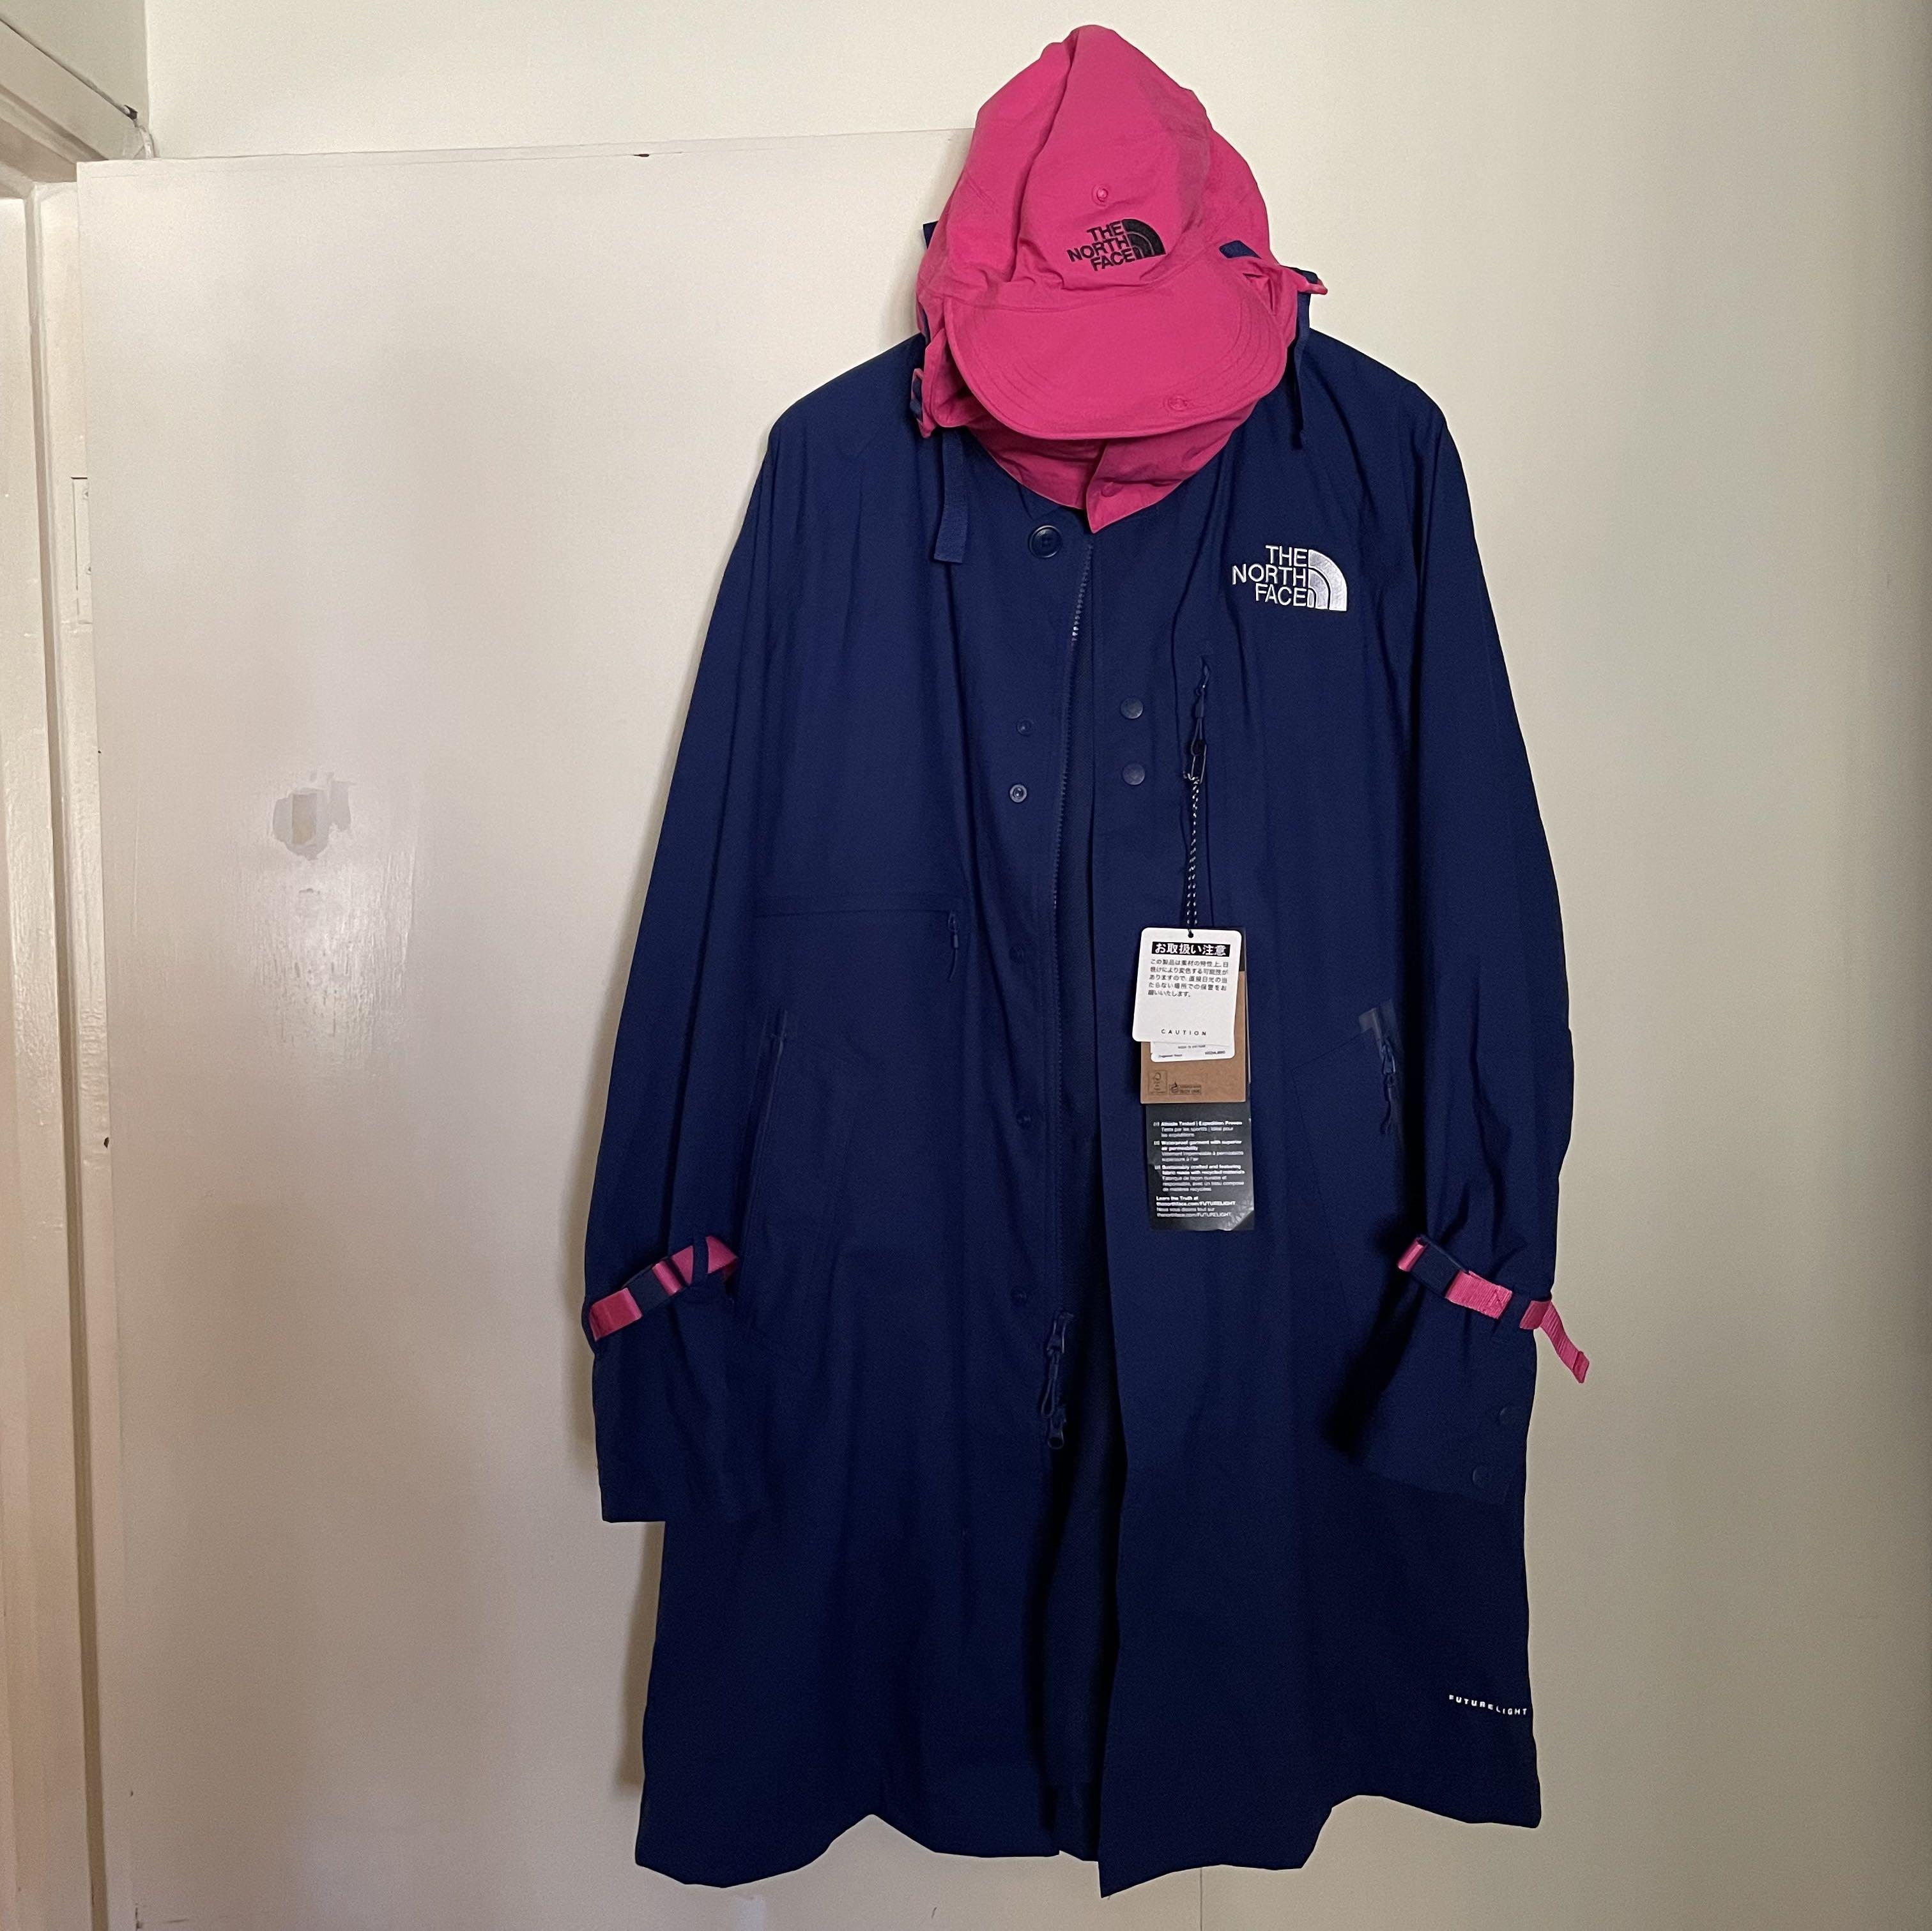 The north face x KAZUKI Pink 倉石一樹jacket trench coat 乾濕褸, 男 